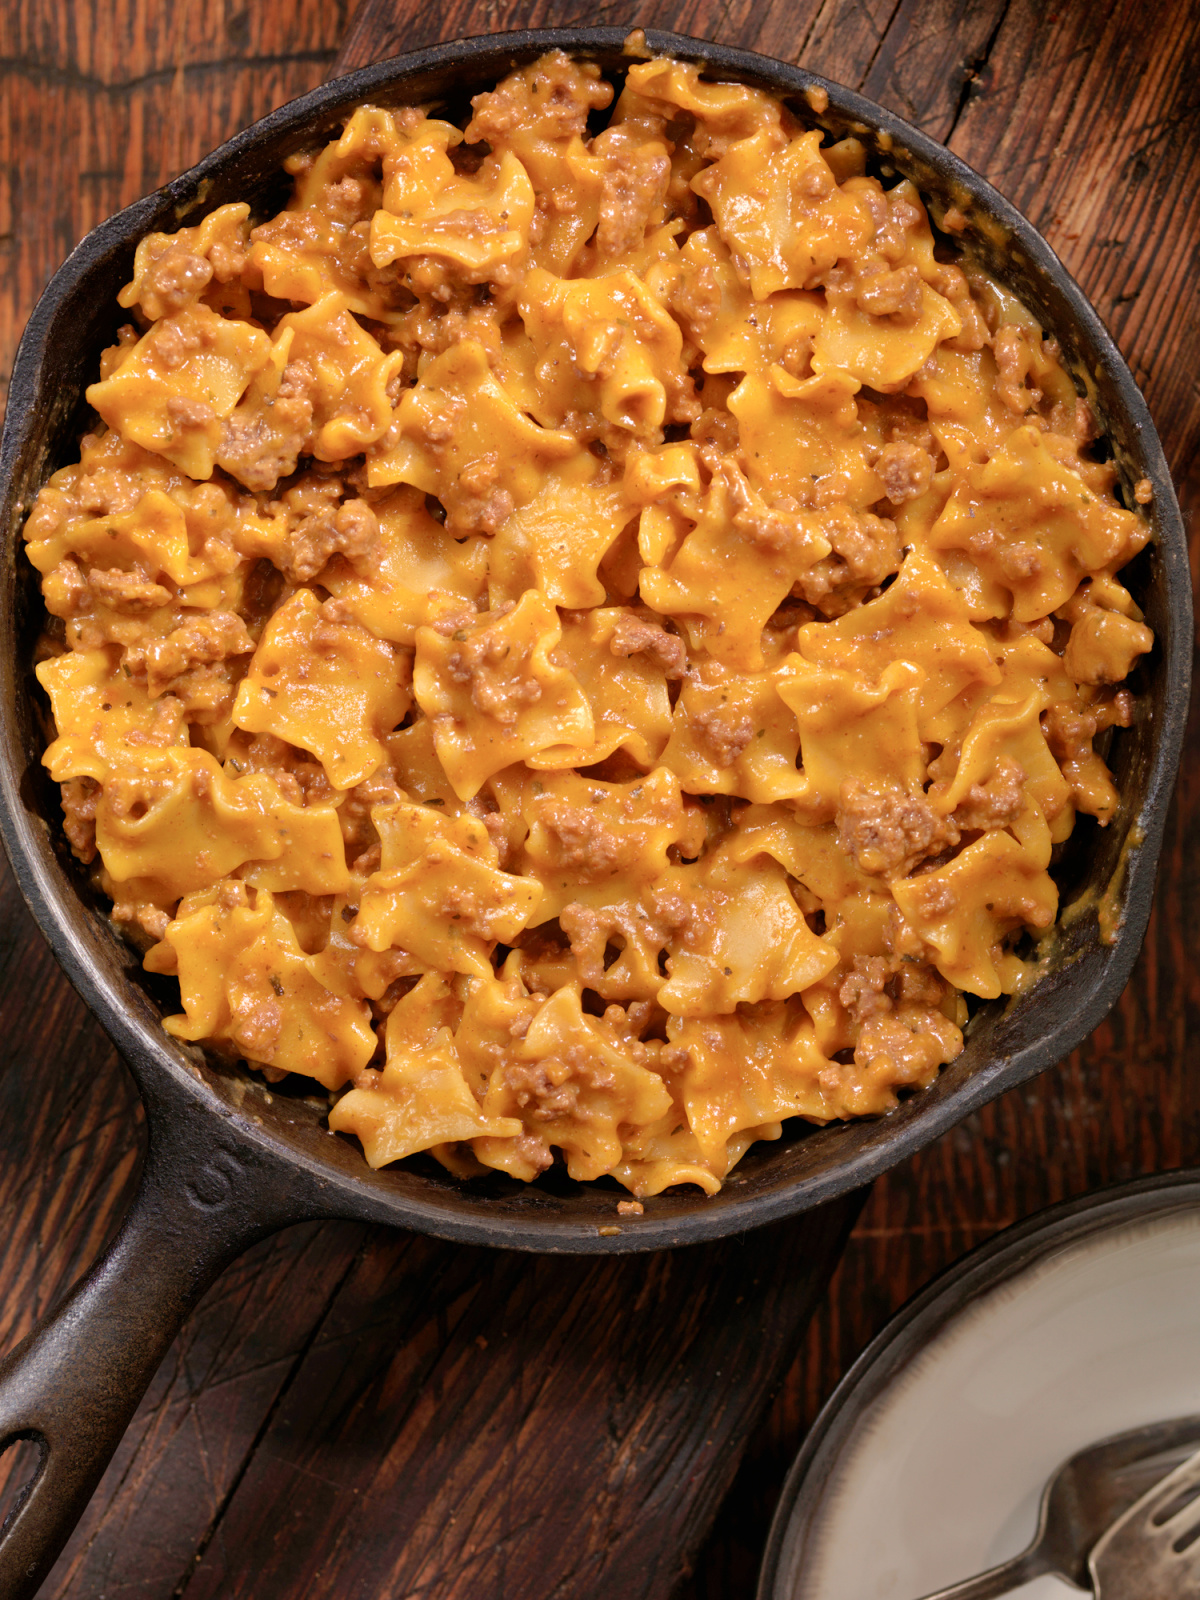 Beefy skillet lasagna is a quick one skillet meal that is similar to hamburger helper beefaroni
